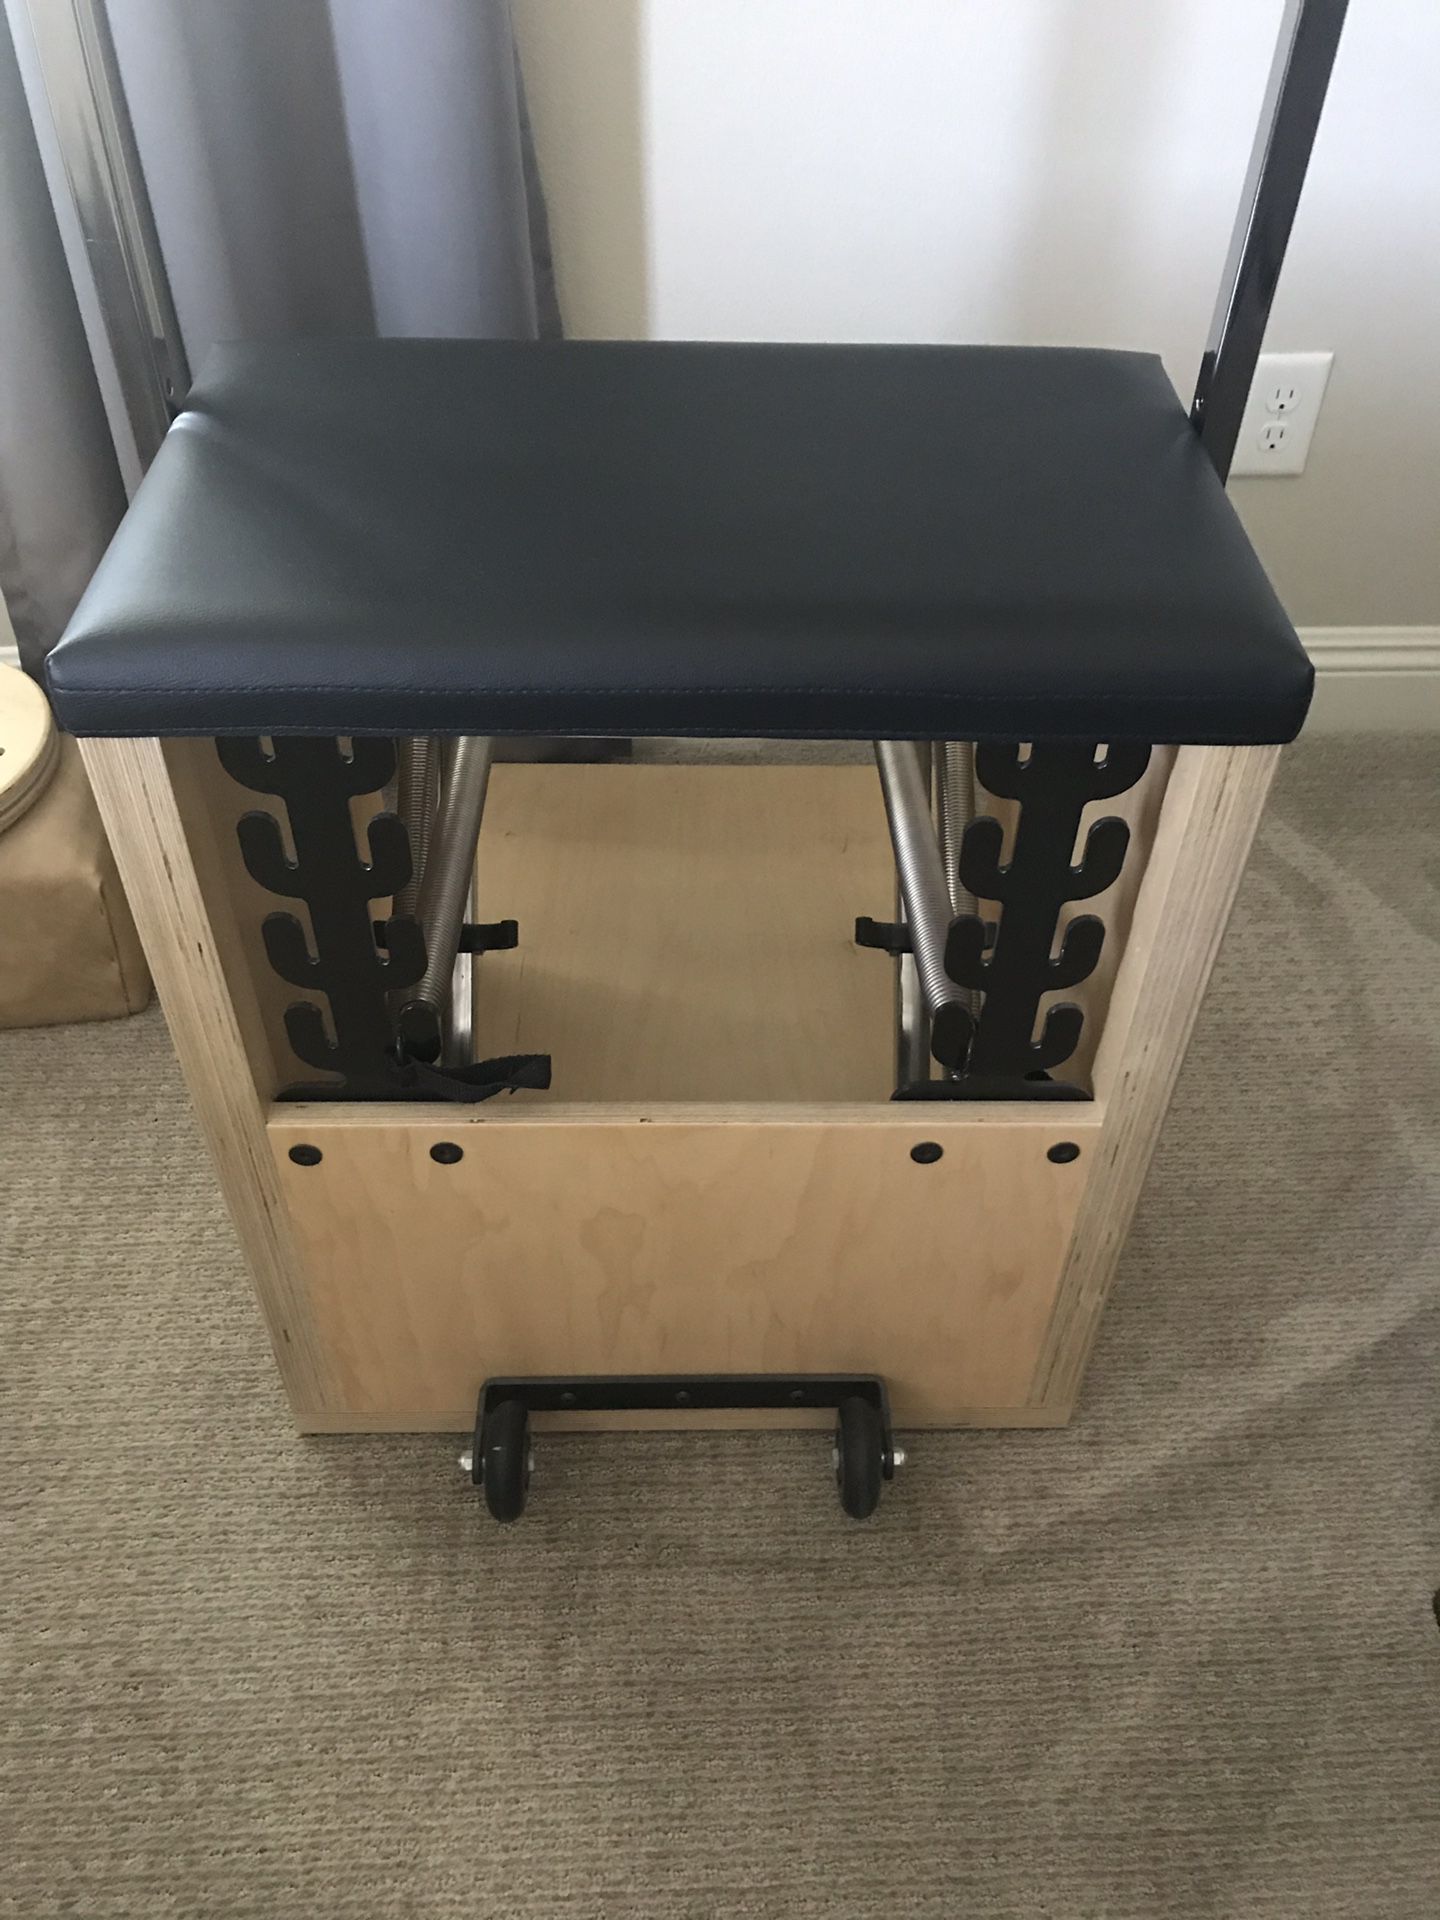 Pilates Combo Chair by Balanced Body for Sale in Las Vegas, NV - OfferUp